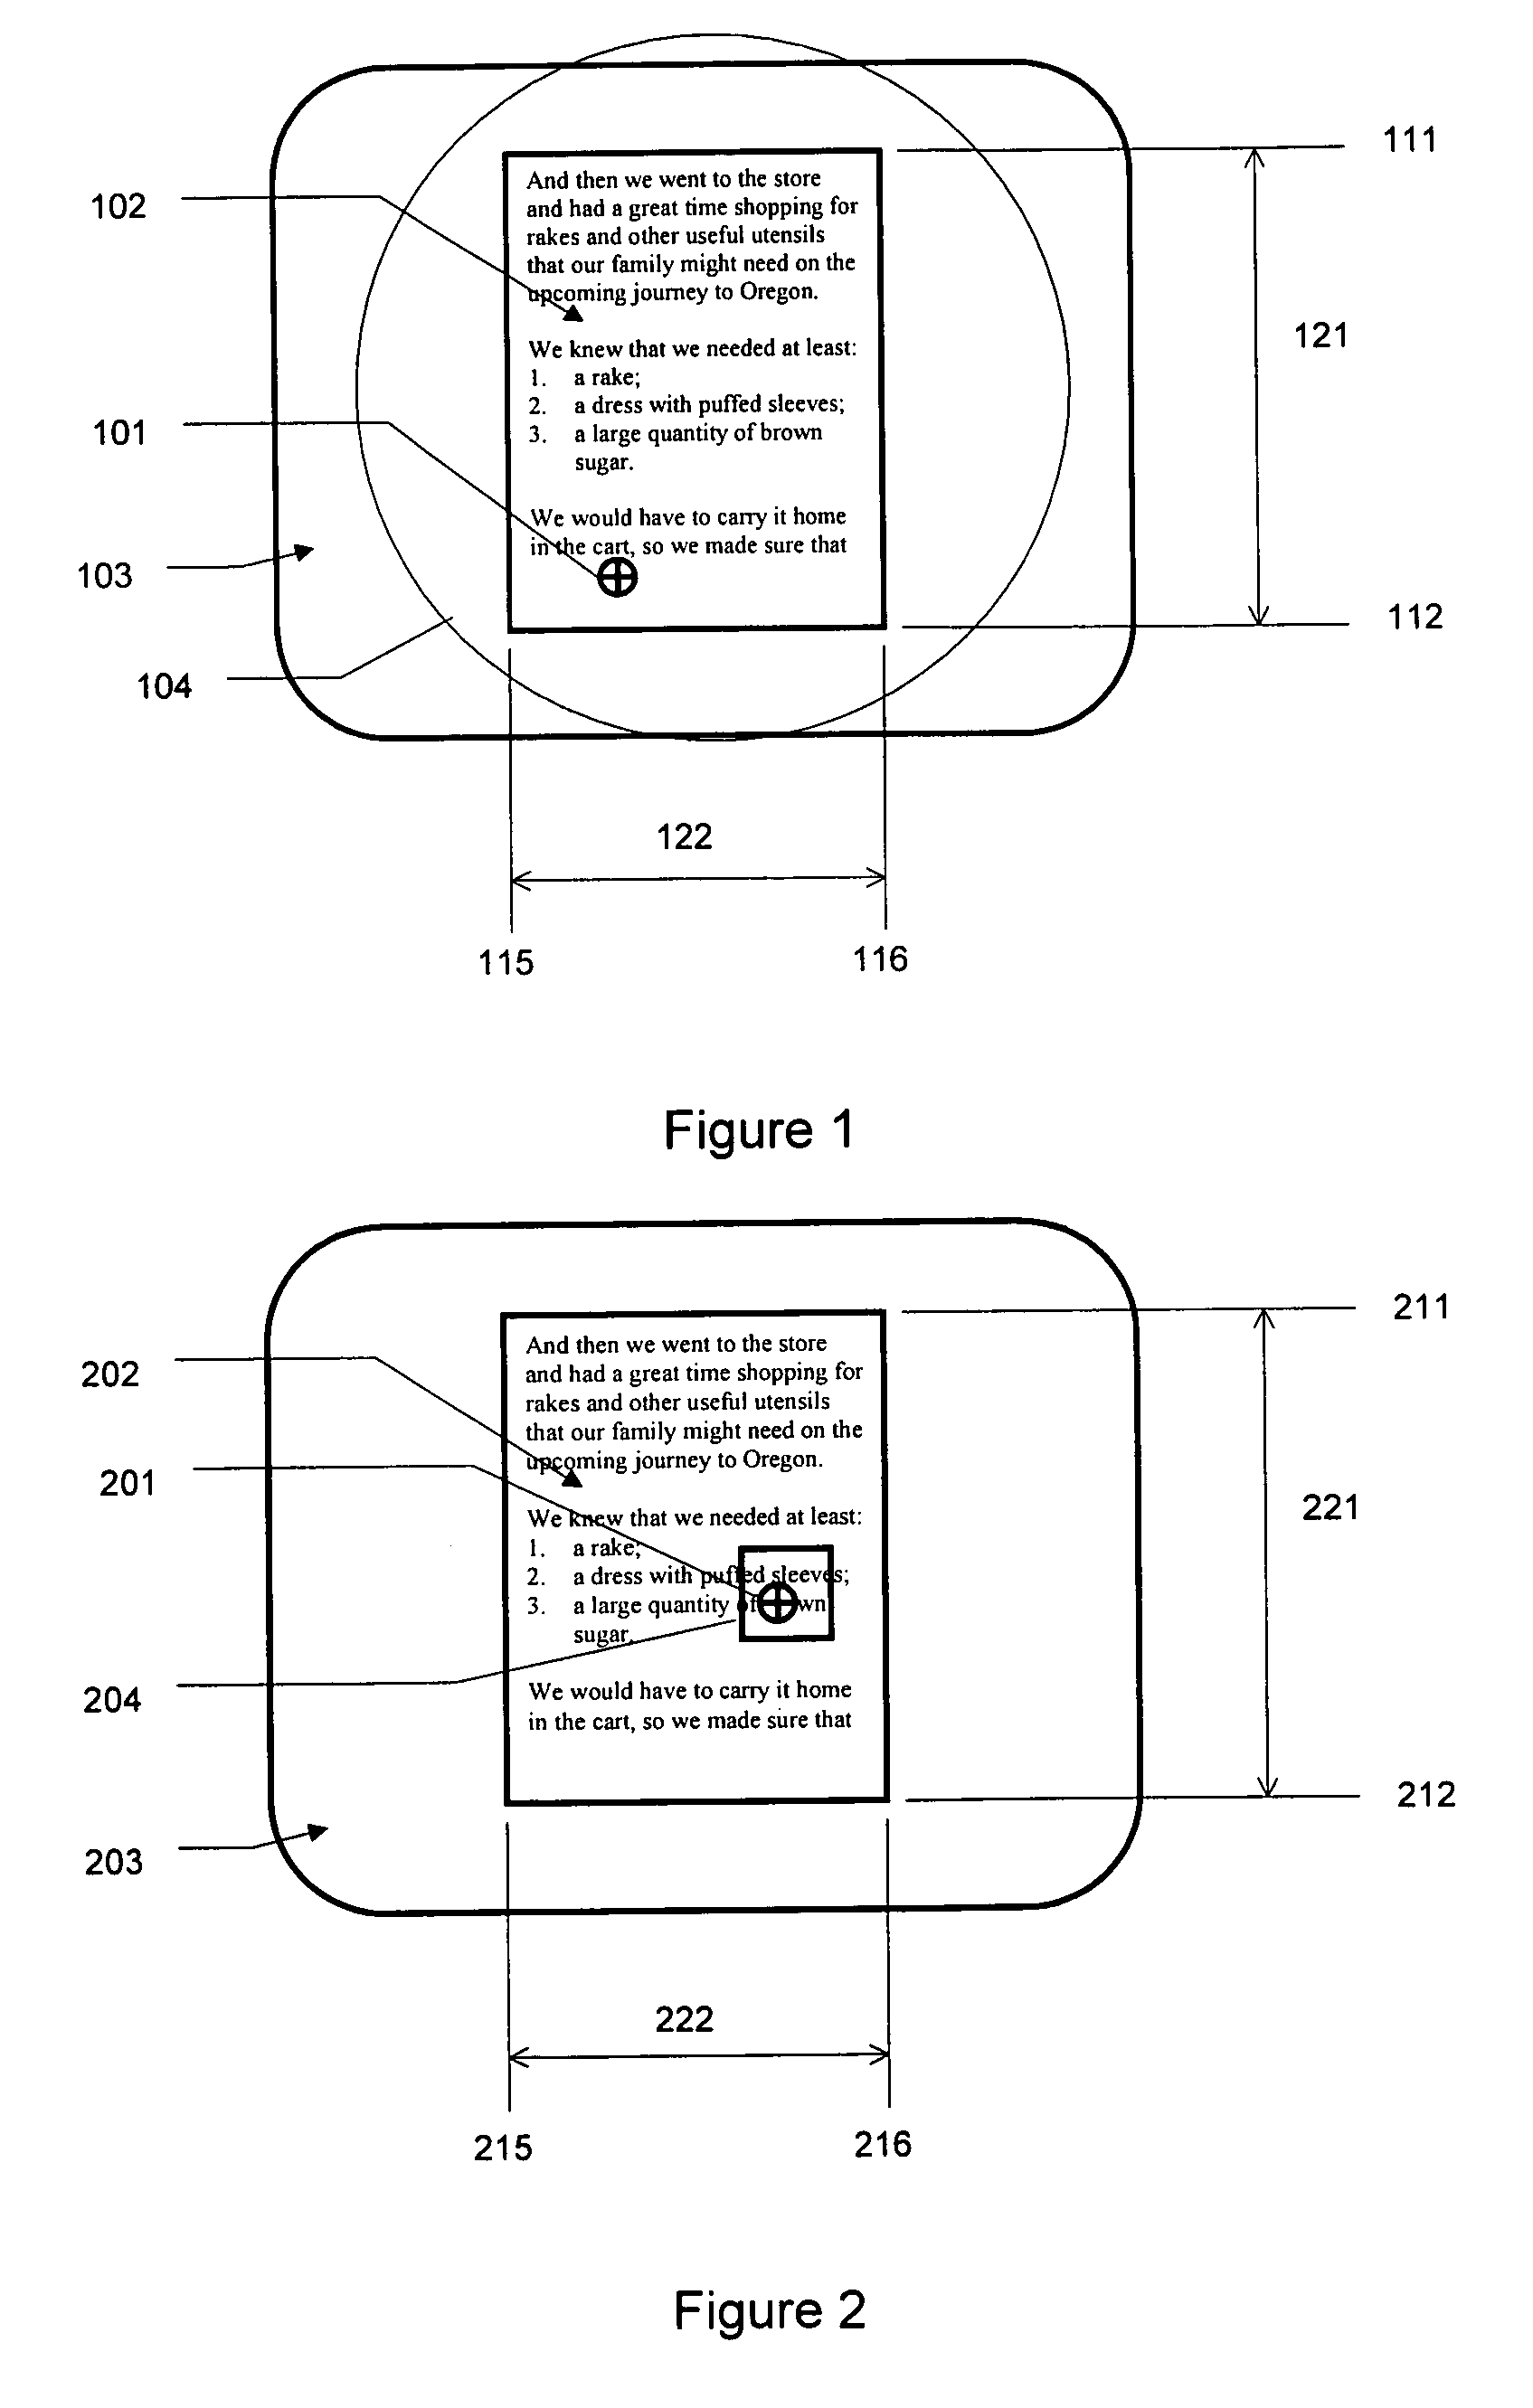 Human-computer interface including haptically controlled interactions